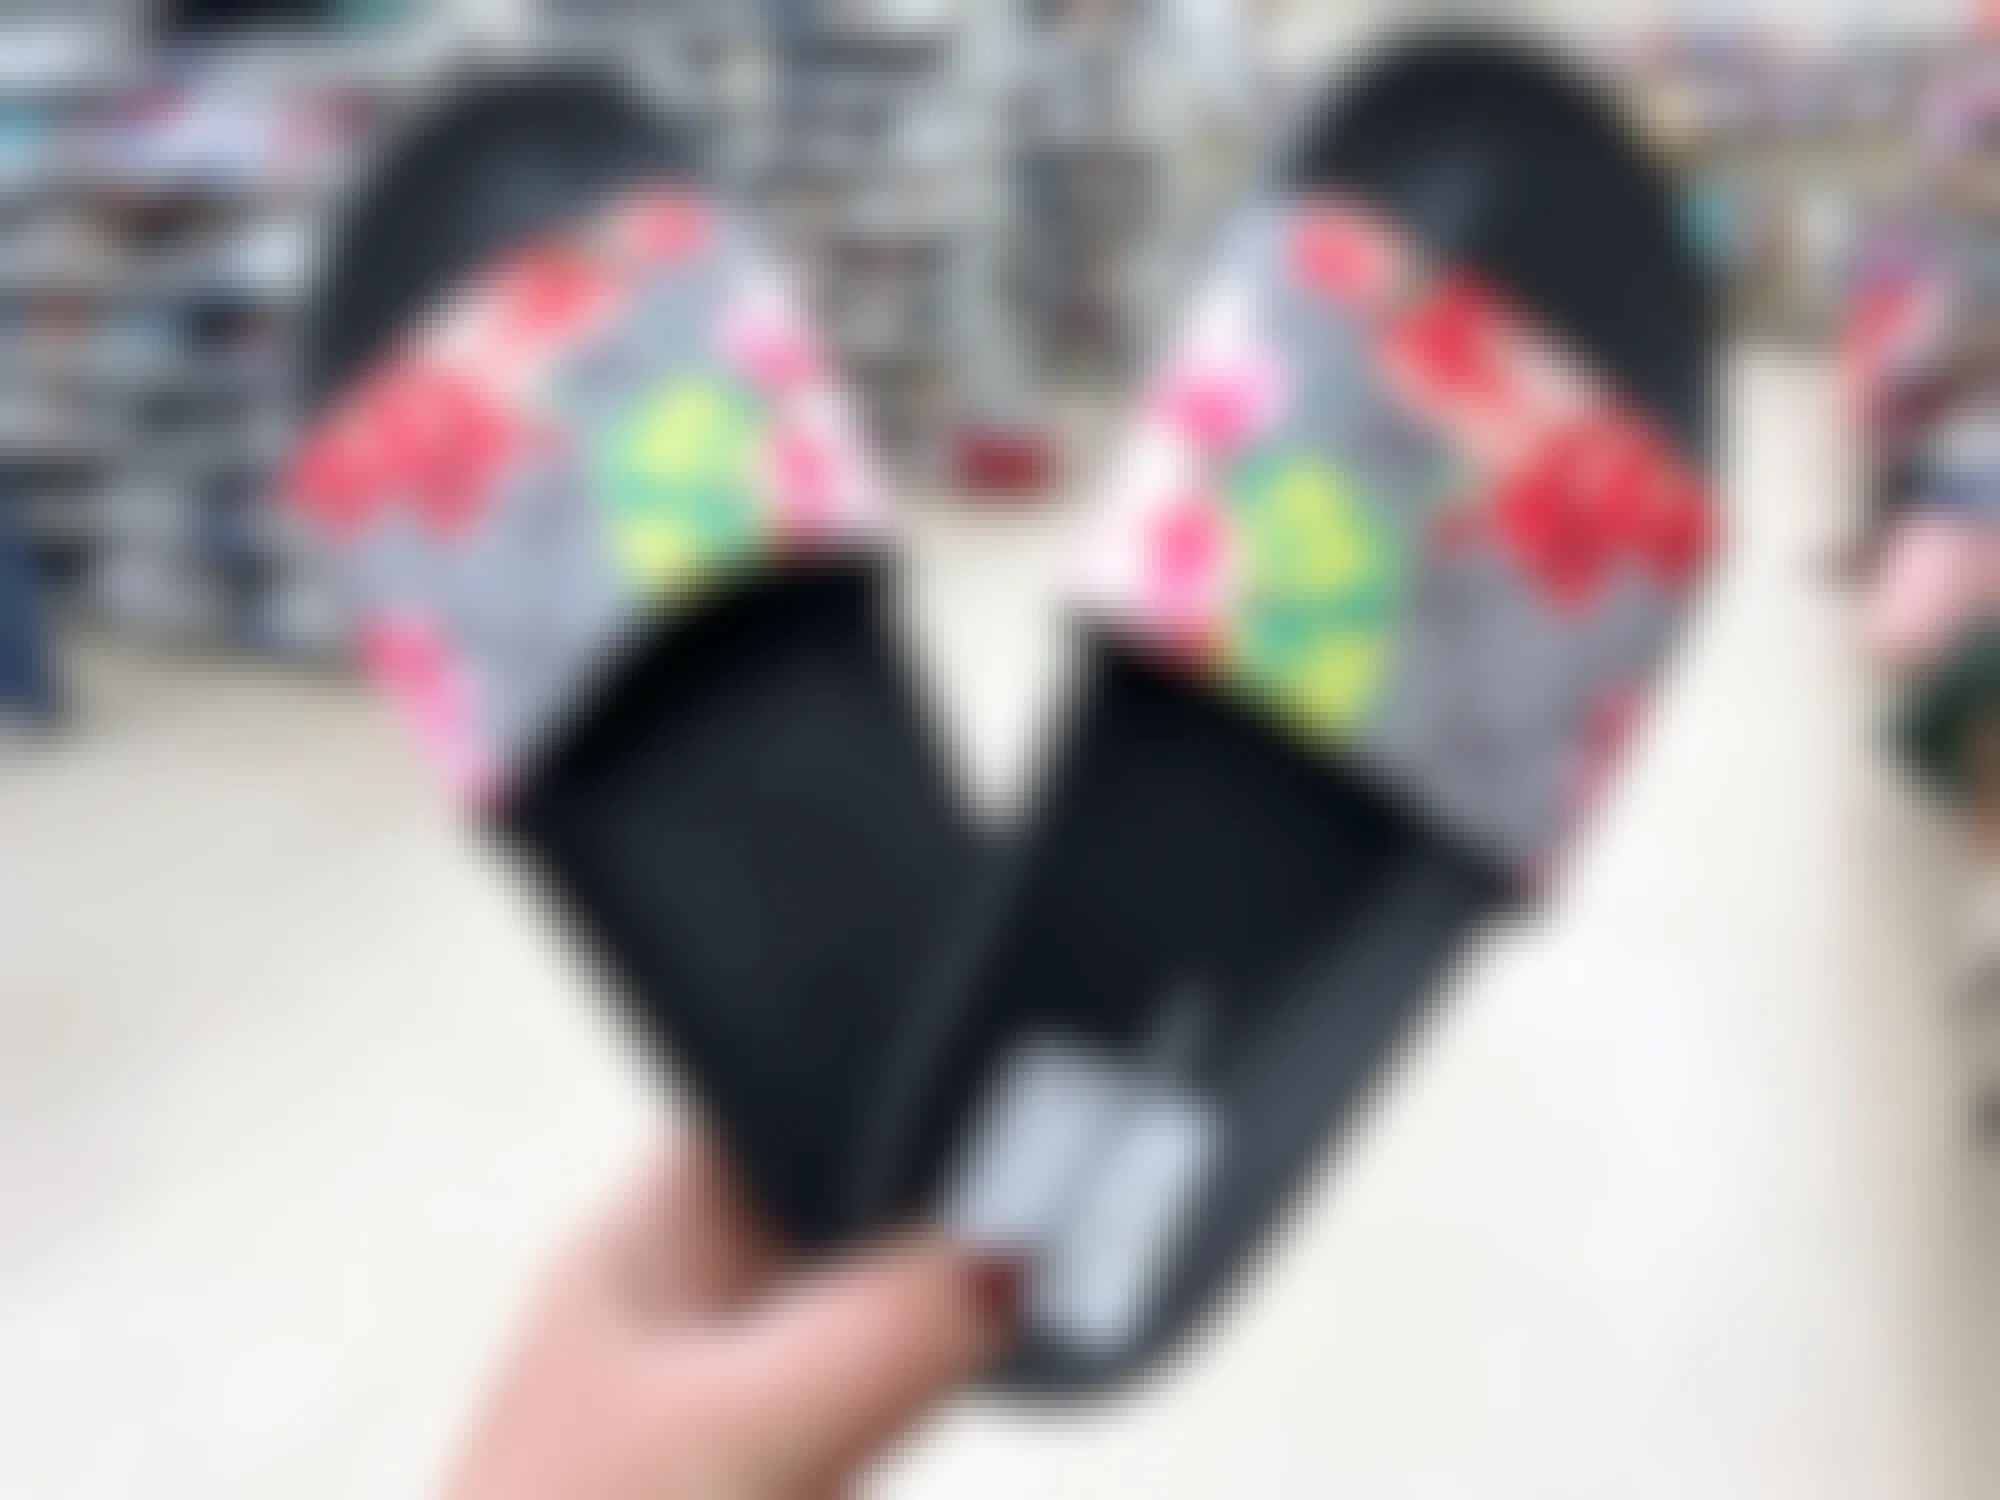 person holding a pair of floral gucci slides at a thrift store